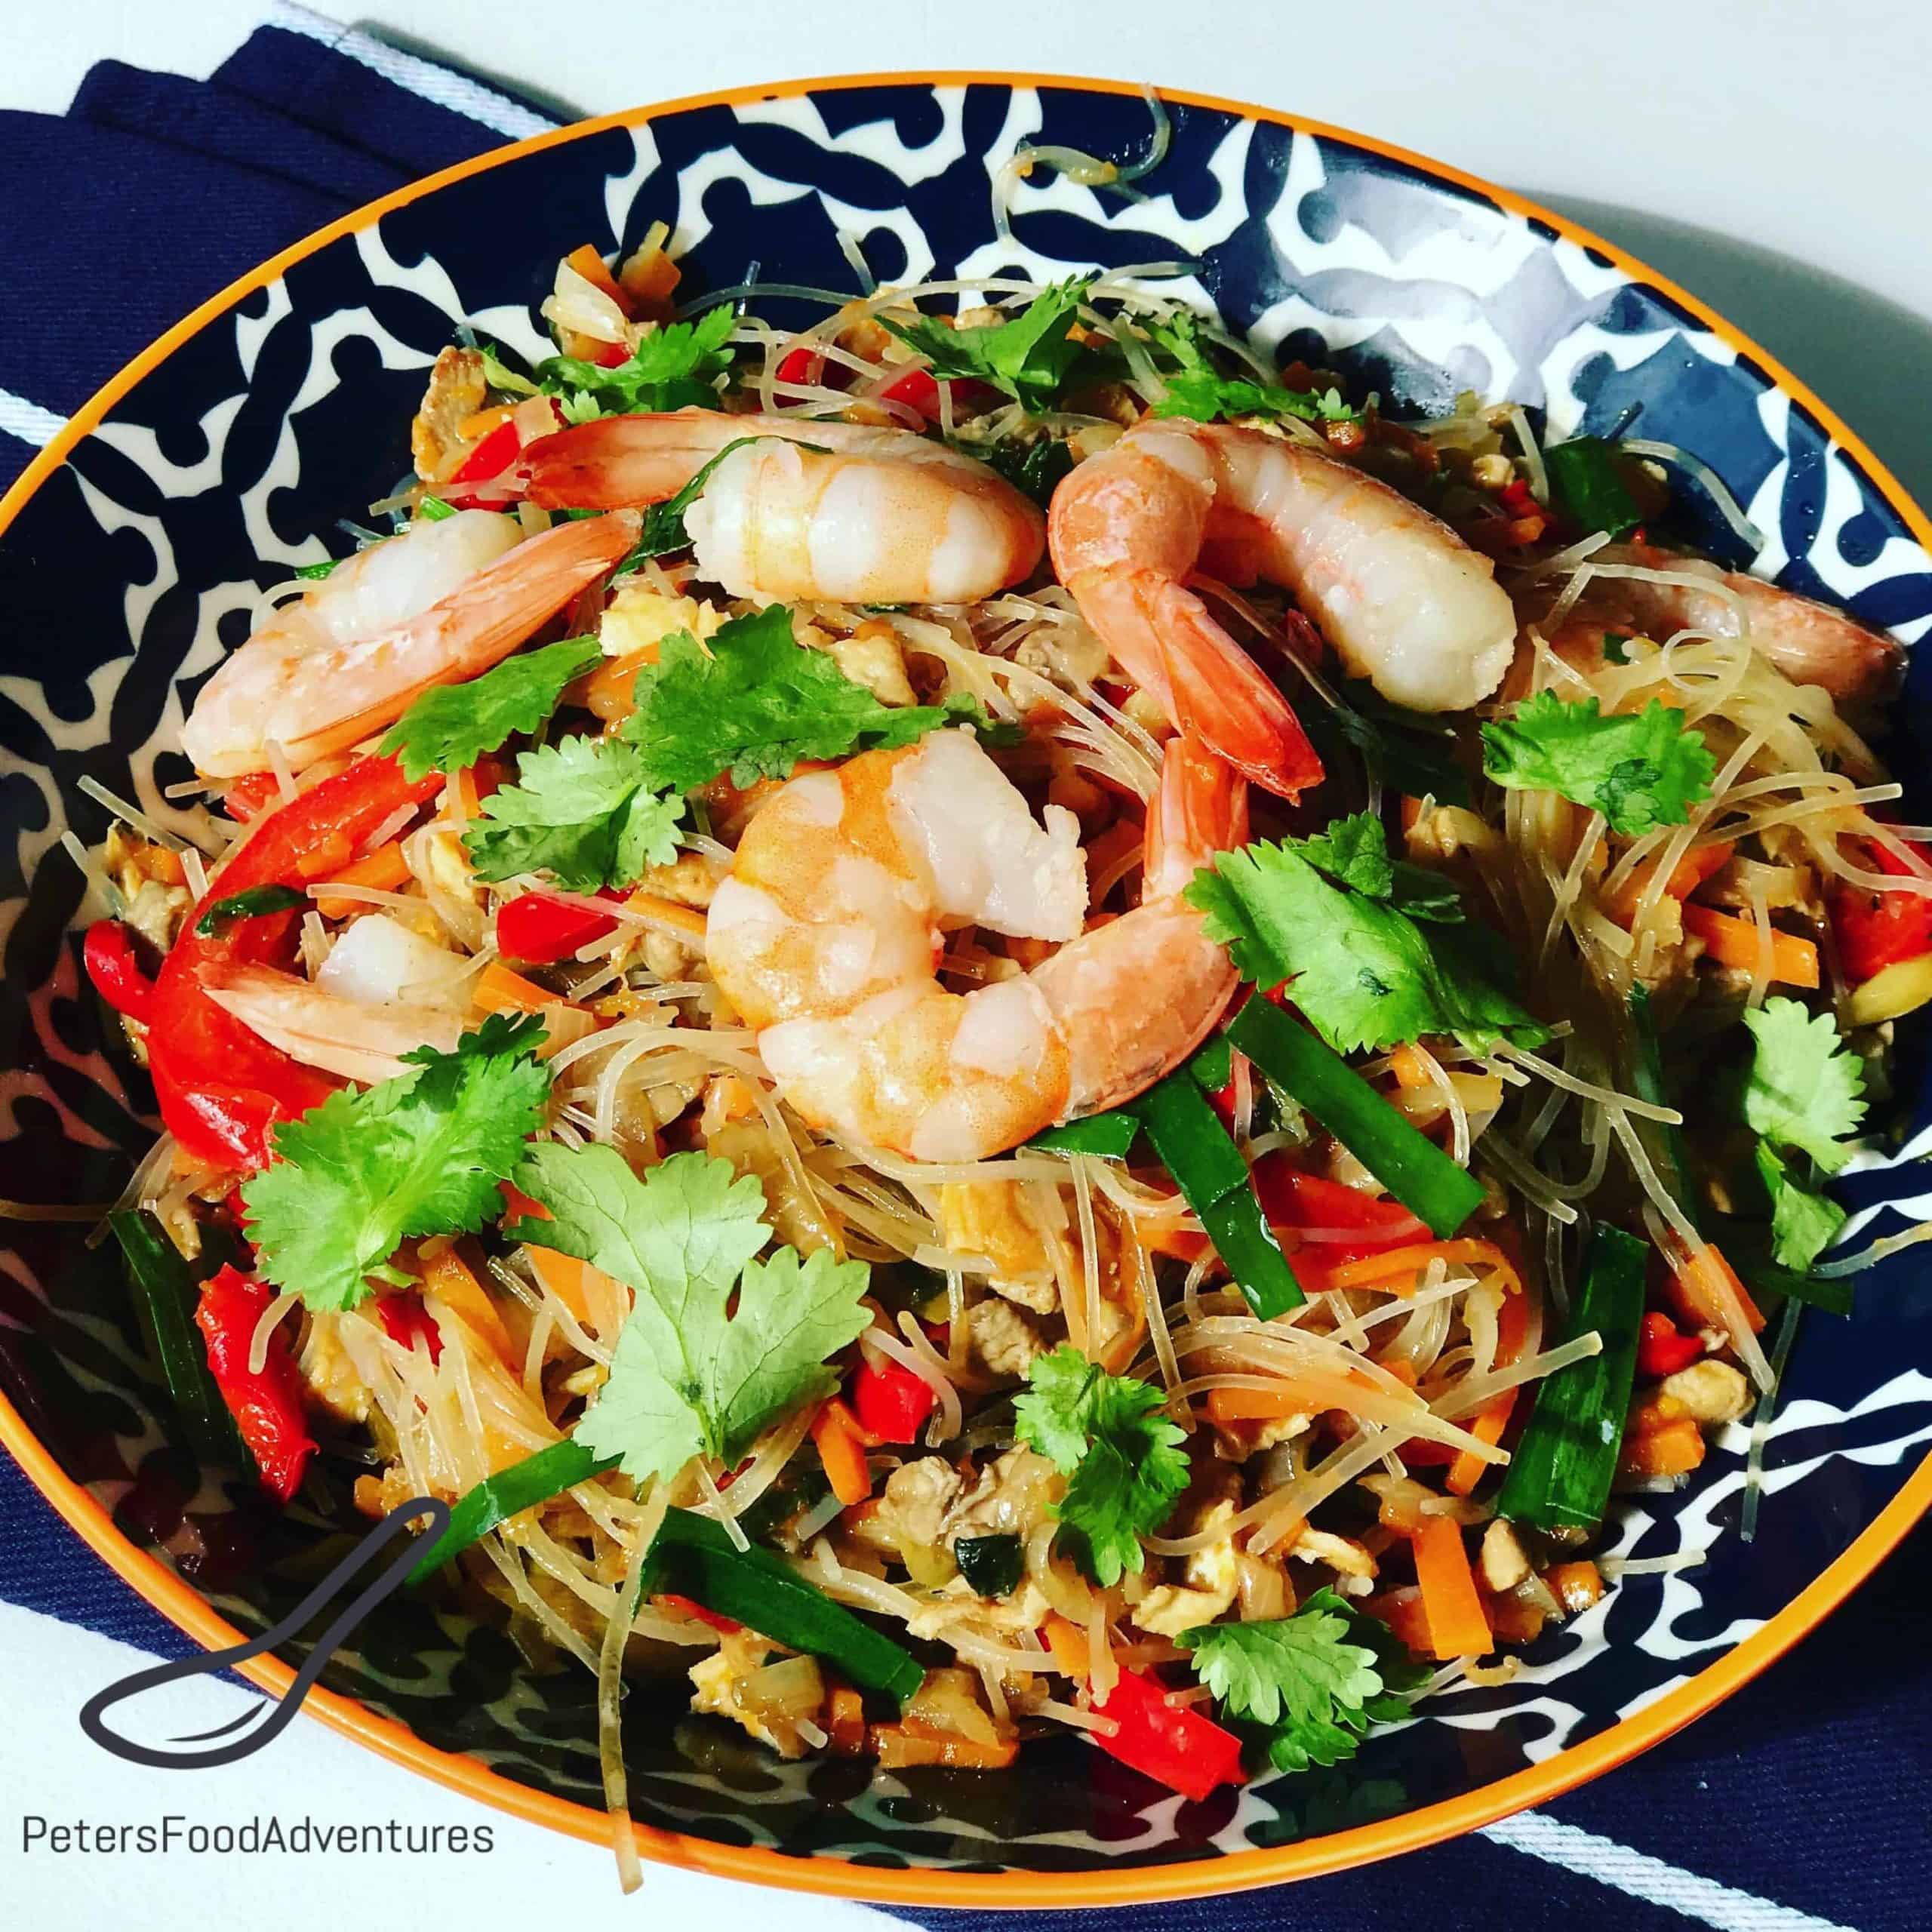 This Asian Noodle Salad comes from Central Asia. It's a colorful salad, deliciously served cold or warm. Made with chicken, shrimp, bean vermicelli, cilantro, red peppers and shrimp, a perfect combination!